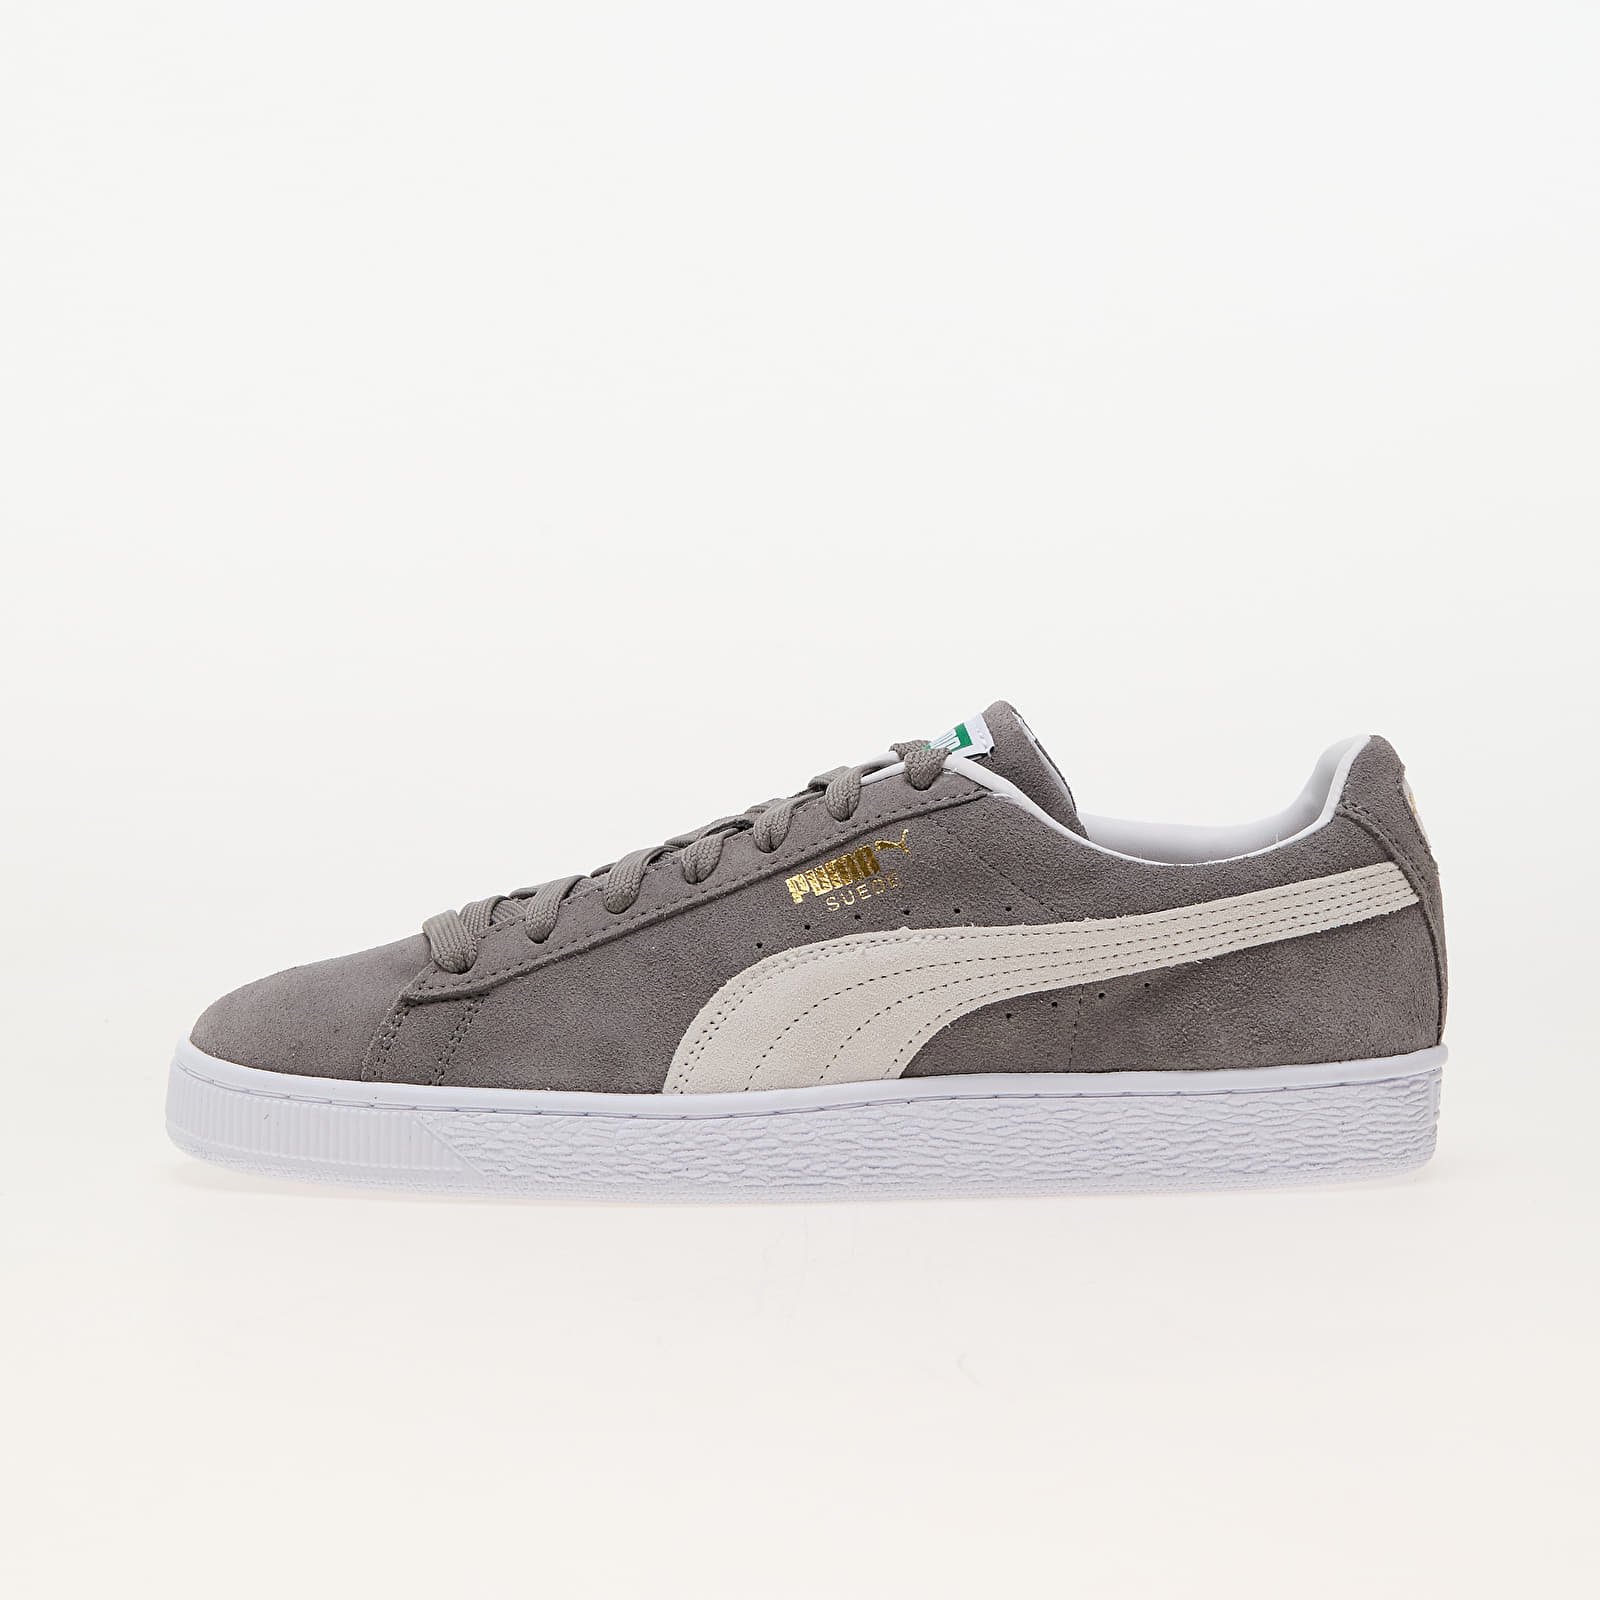 Men's sneakers and shoes Puma Suede Classic XXI Gray